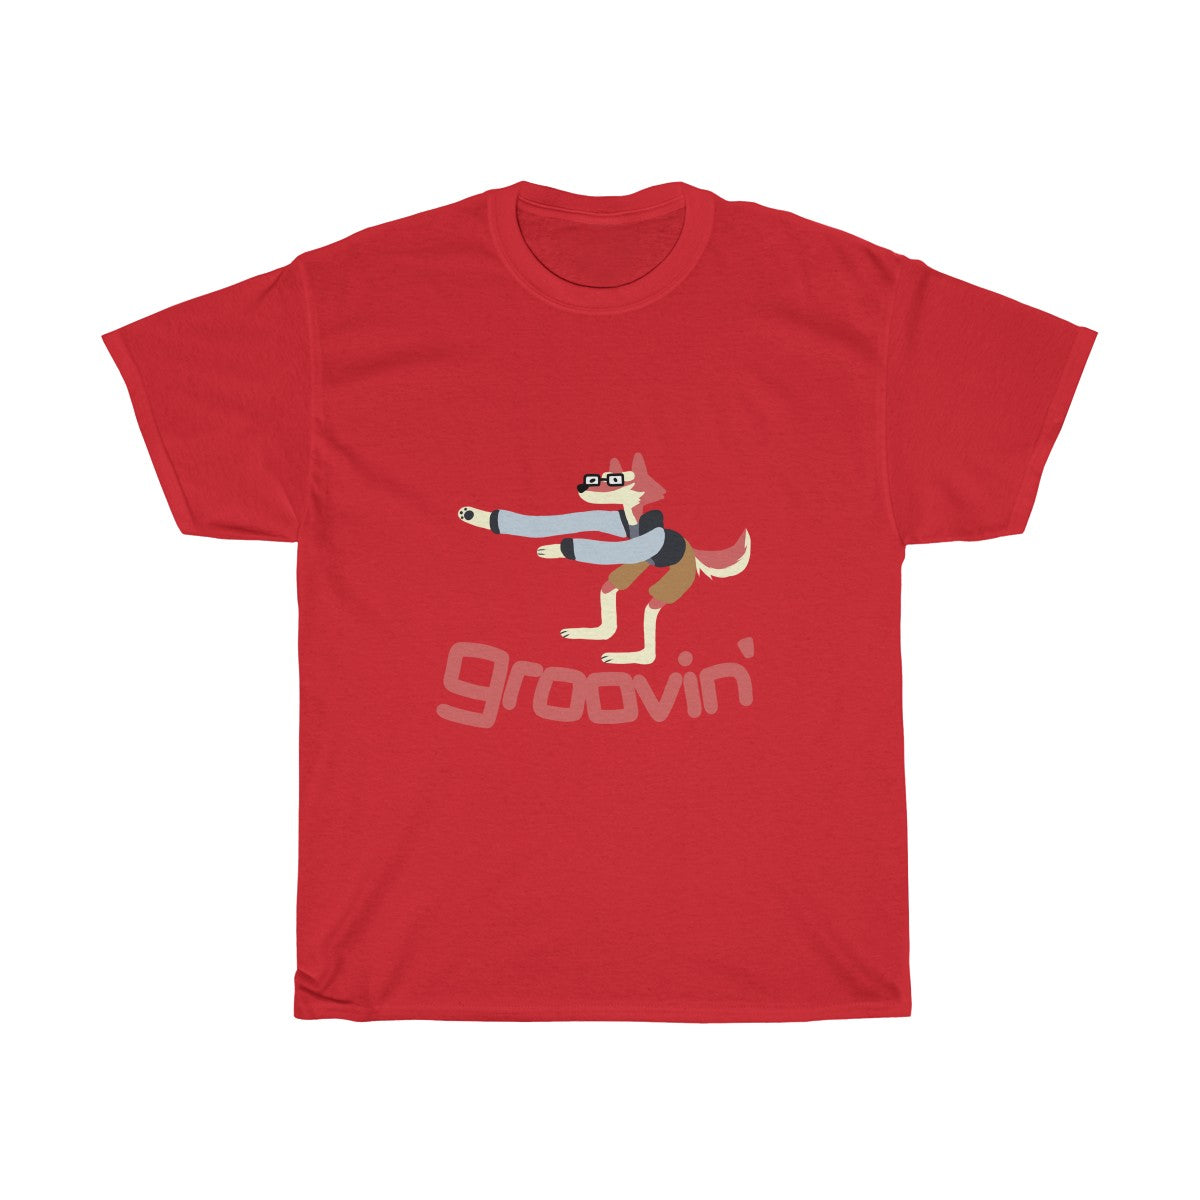 Groovin - T-Shirt T-Shirt Ooka Red S 